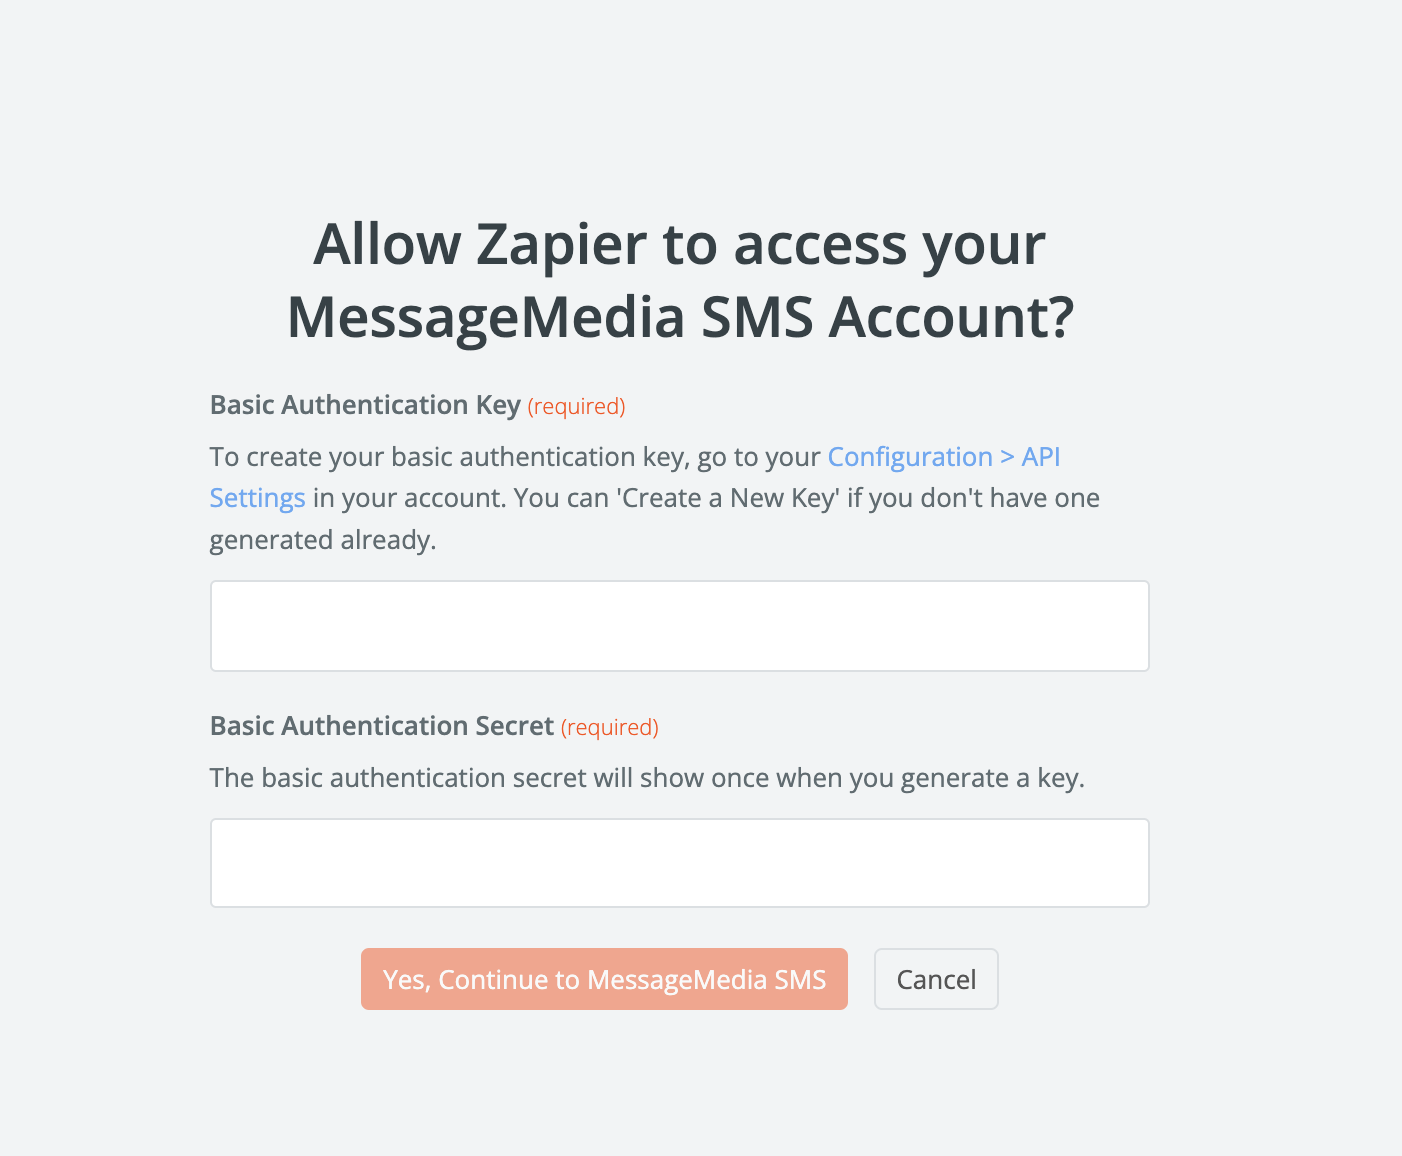 Screen asking for Zapier access to MessageMedia account